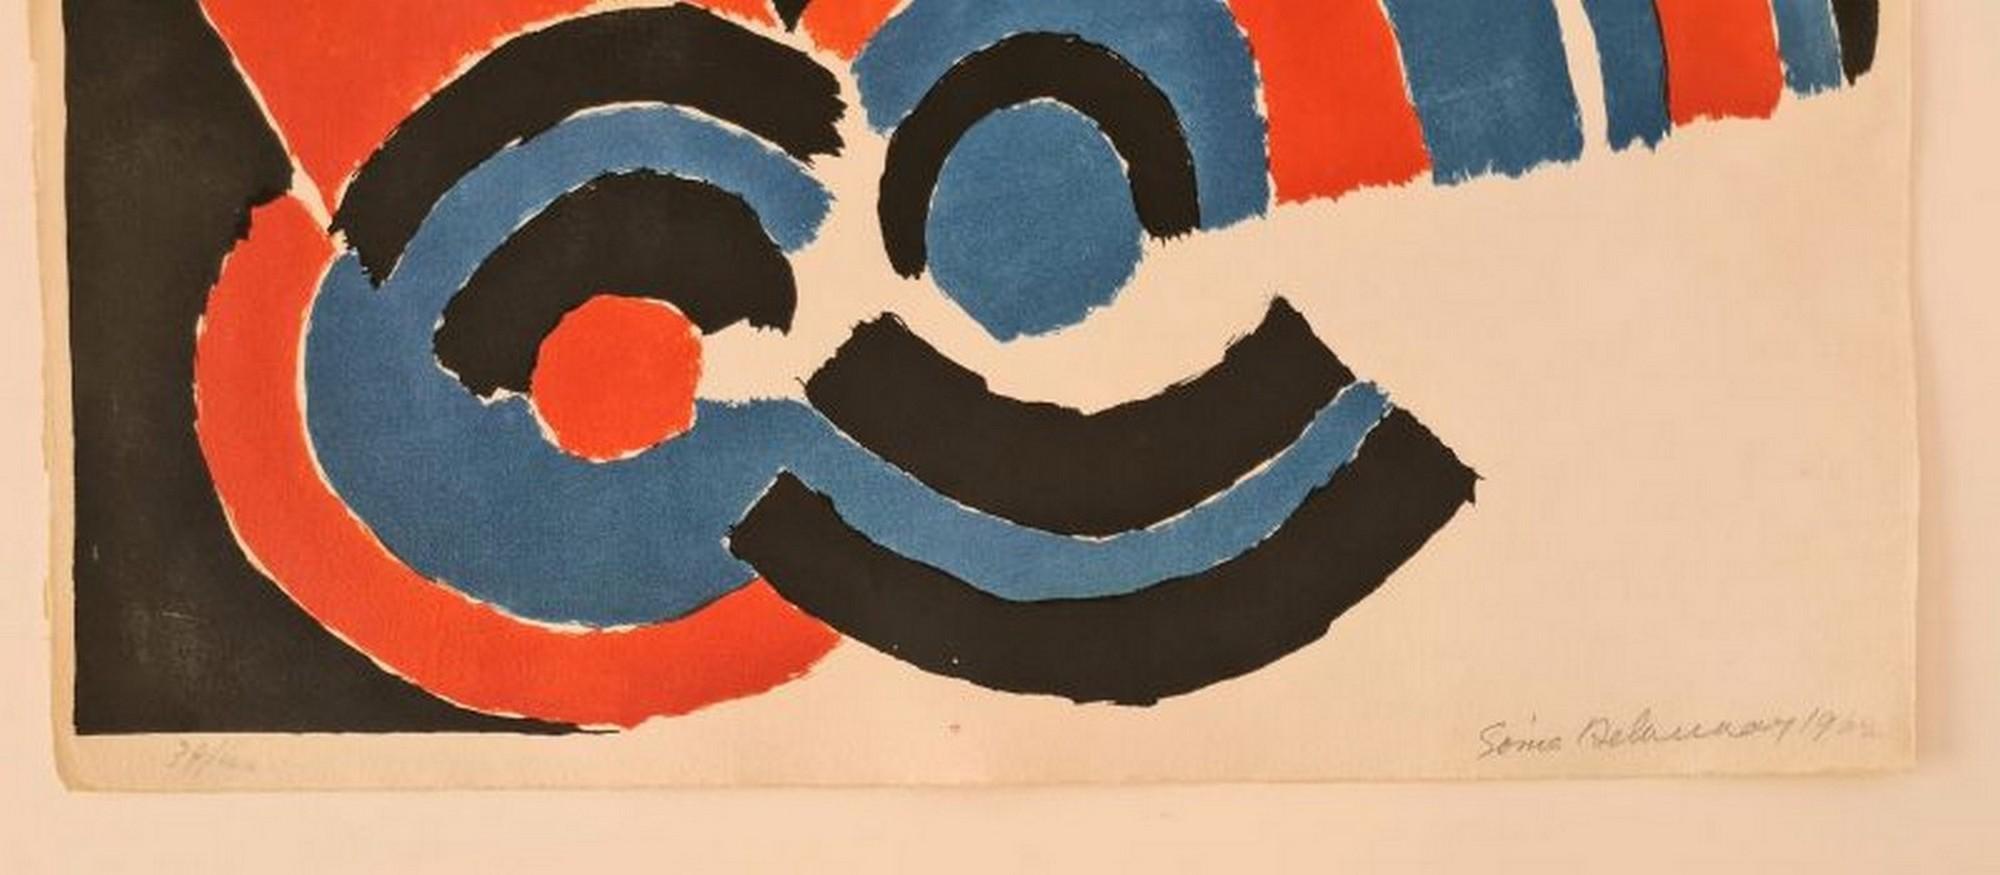 No title - Print by Sonia Delaunay